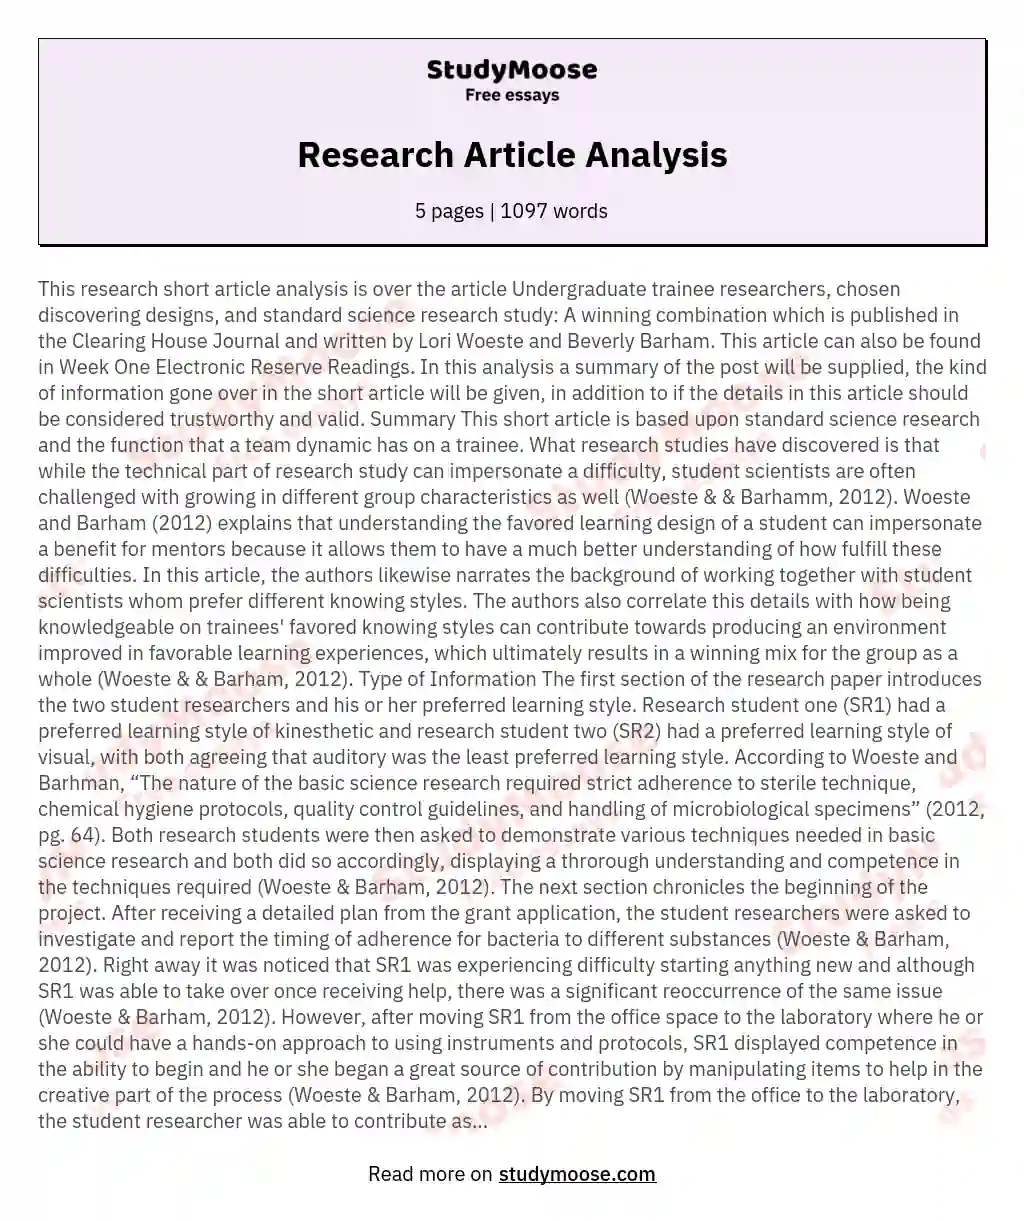 Research Article Analysis essay